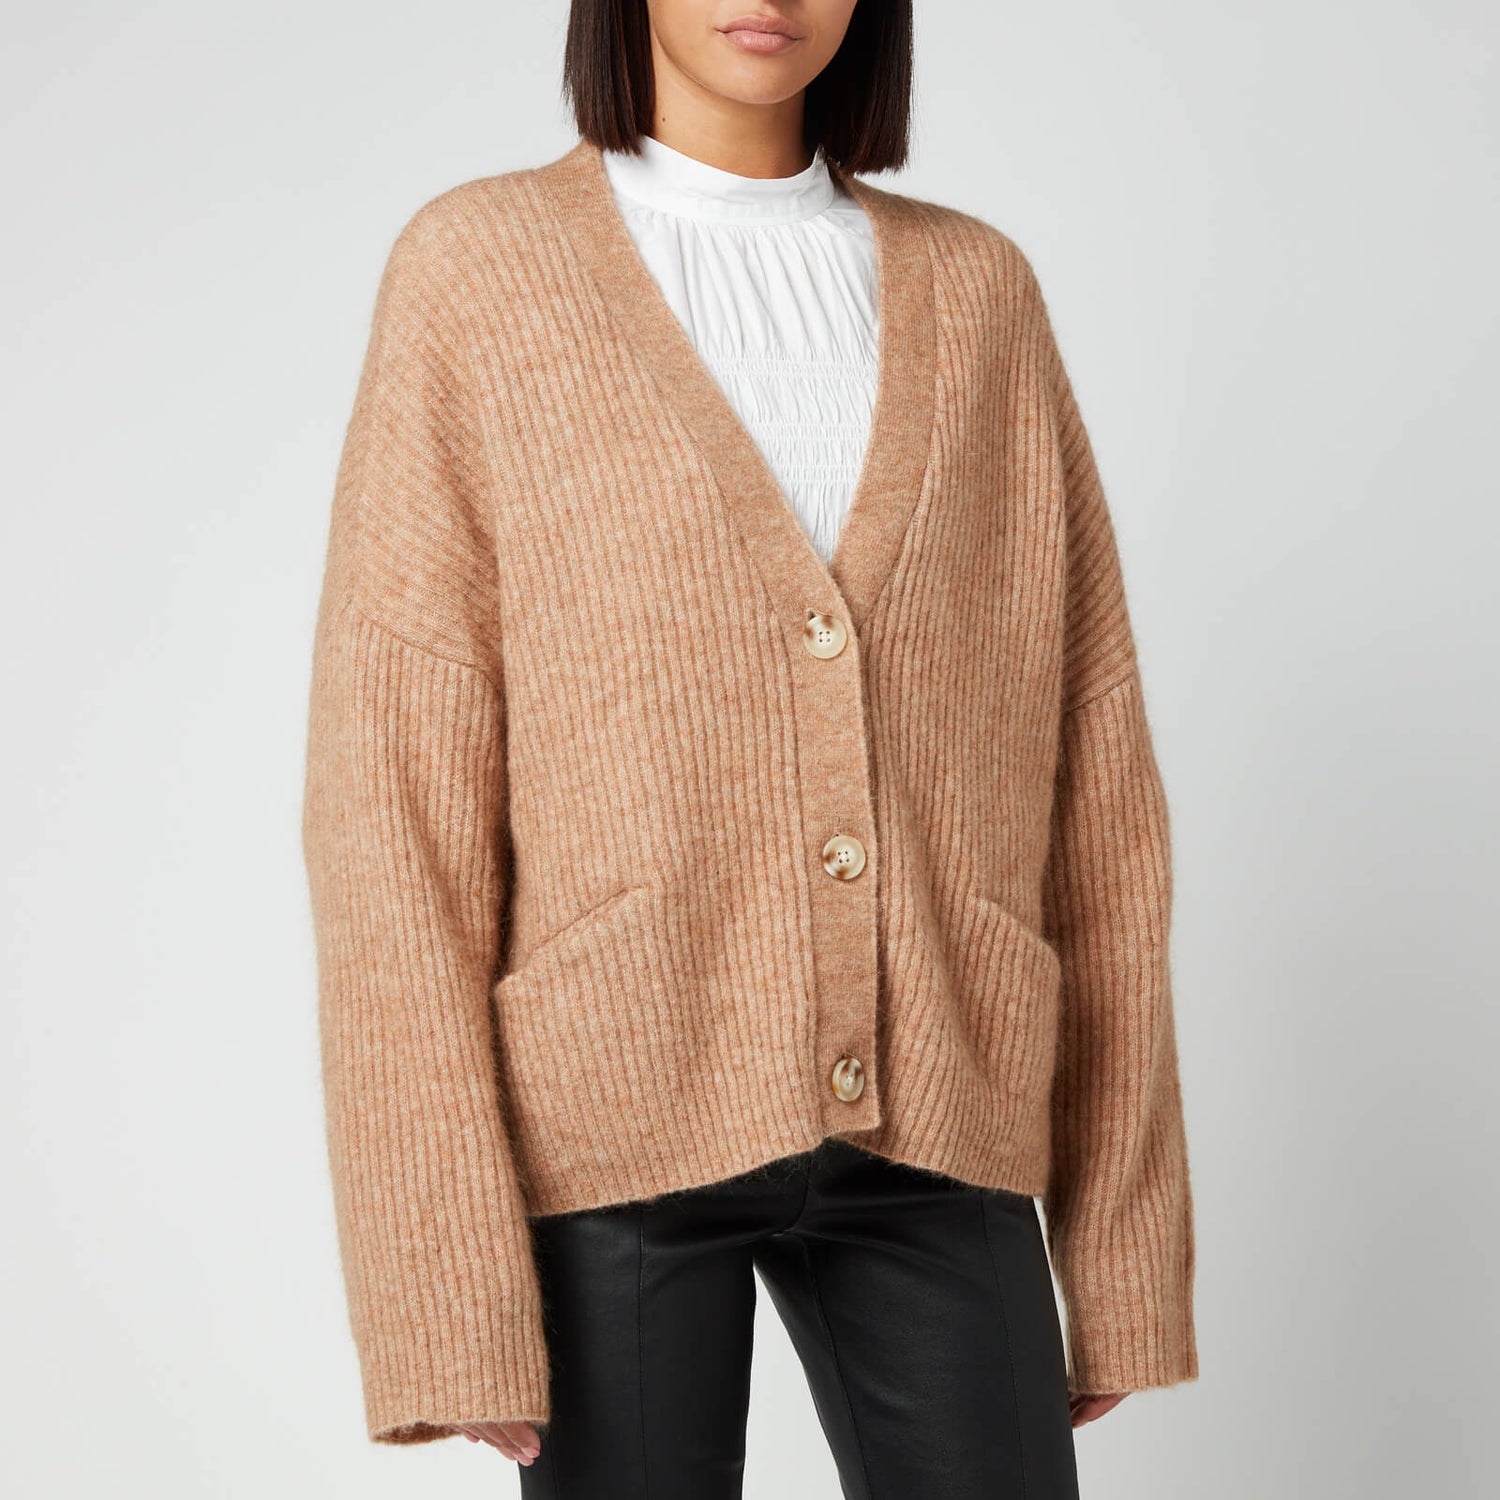 Holzweiler Women's Drive Knitted Cardigan - Camel - L